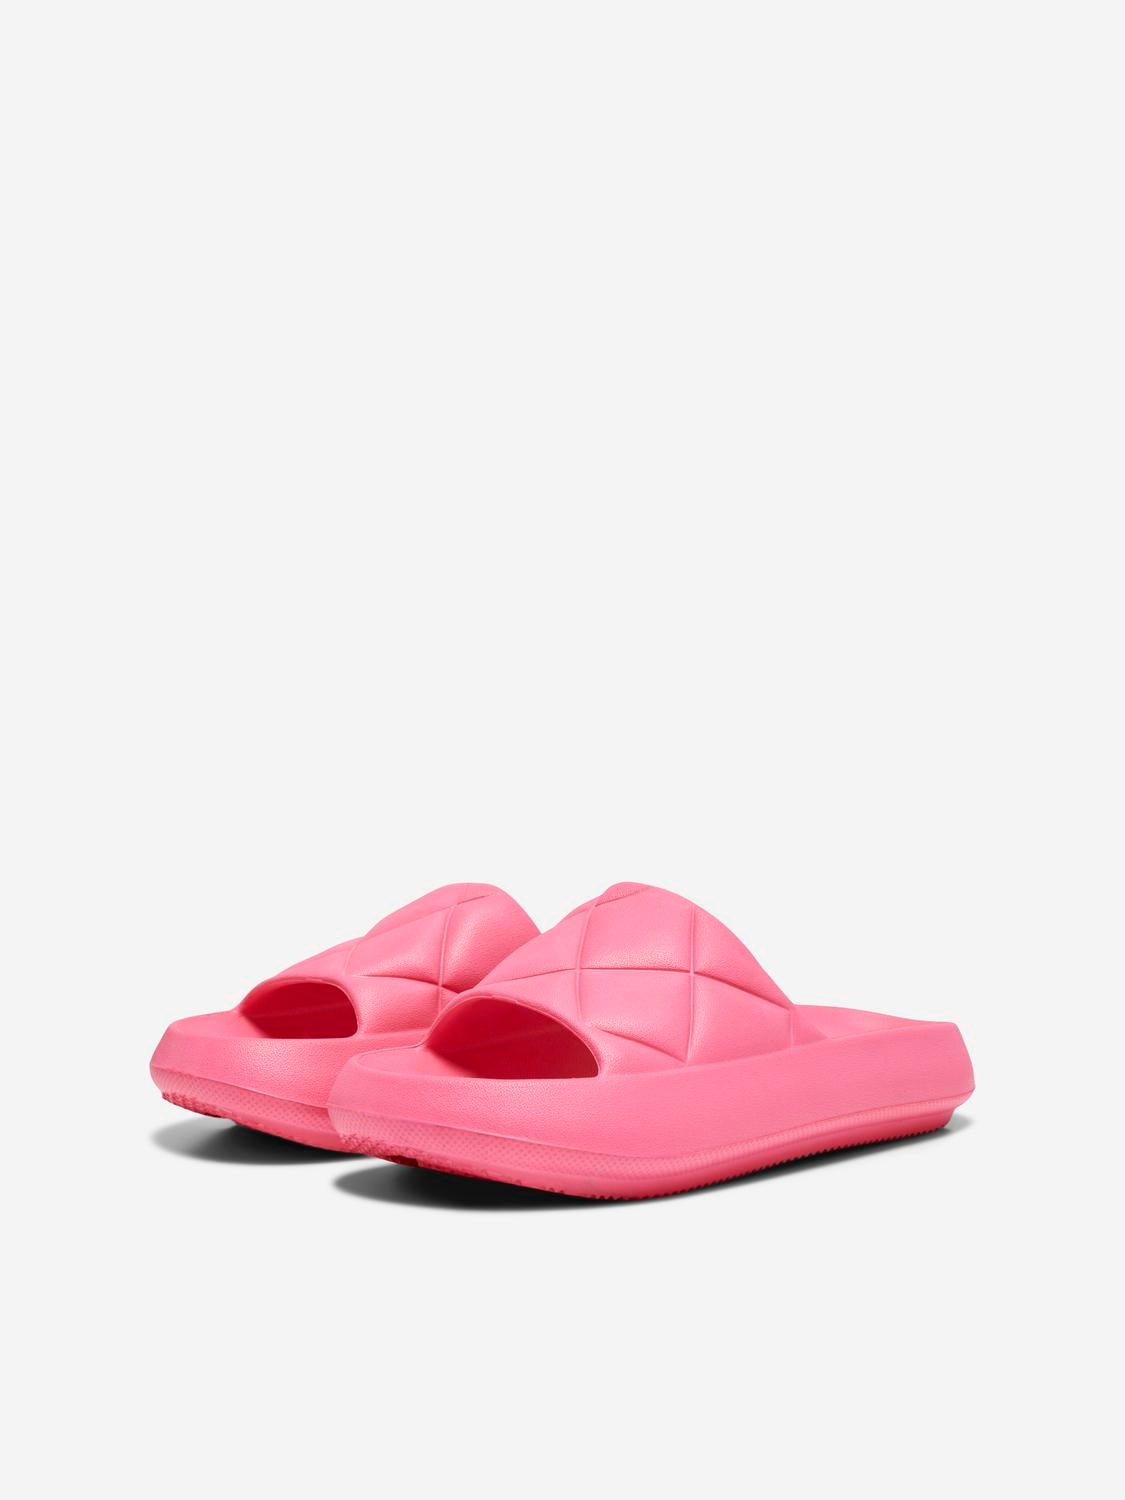 ONLY Rubber Sliders -Pink Glo - 15288145